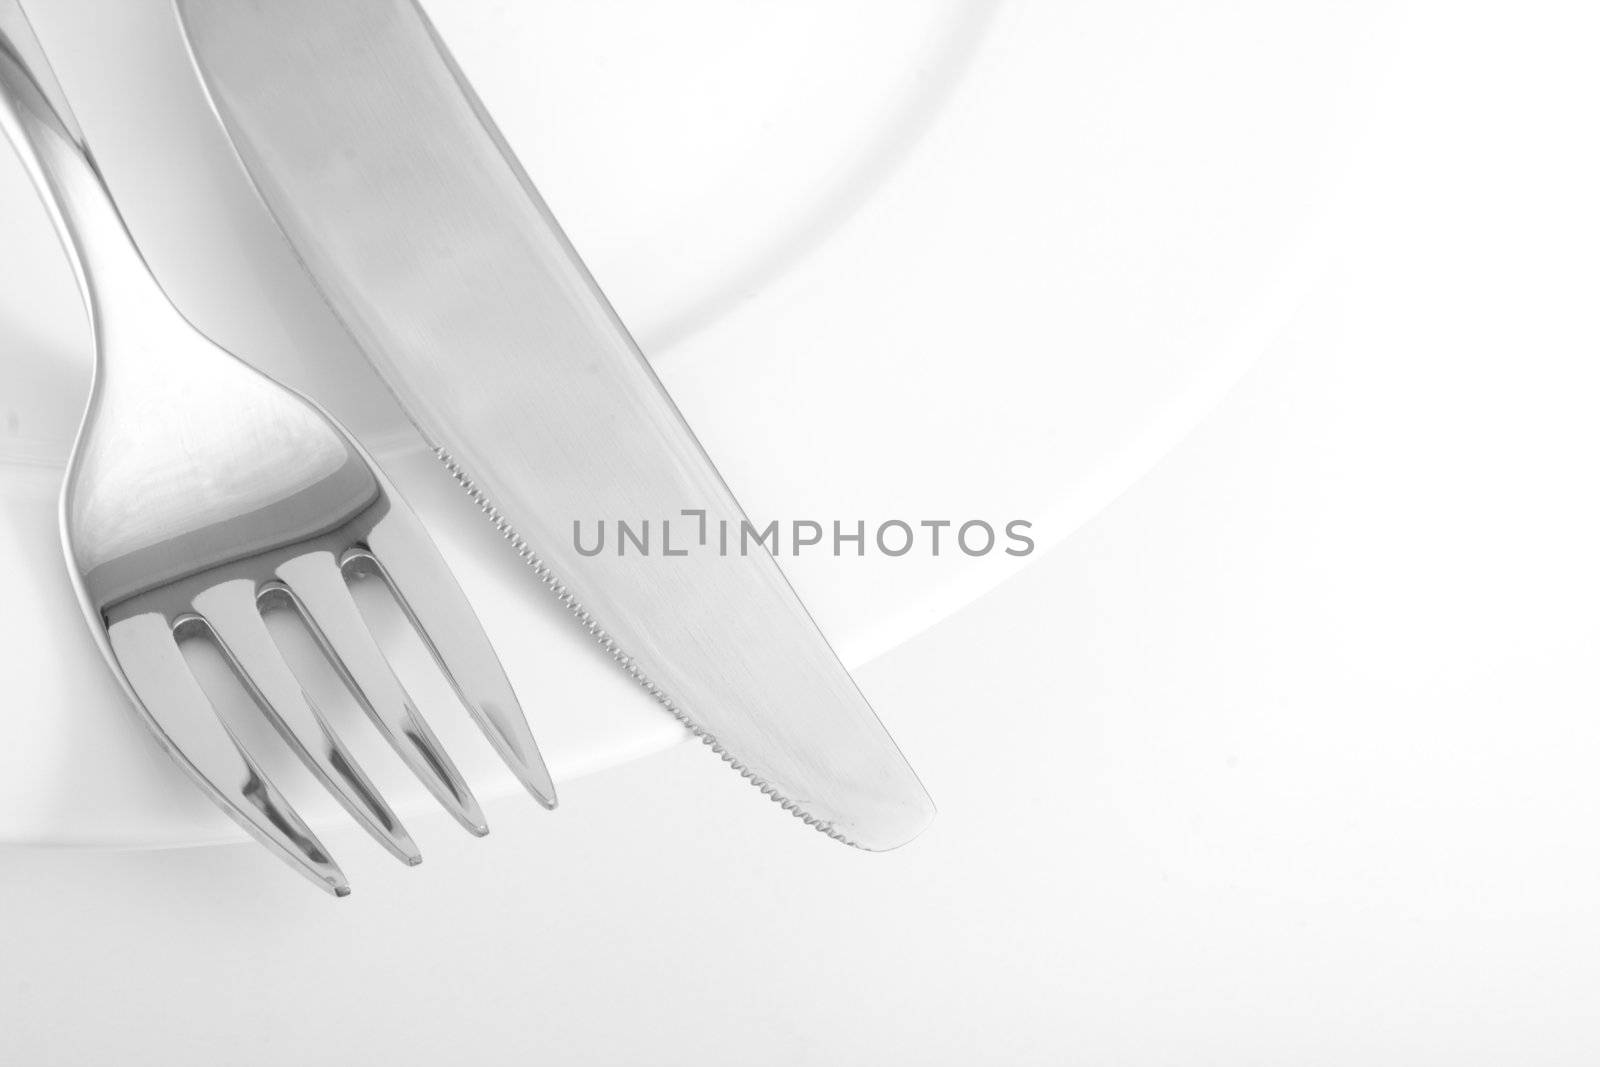 cutlery on a plate by bernjuer